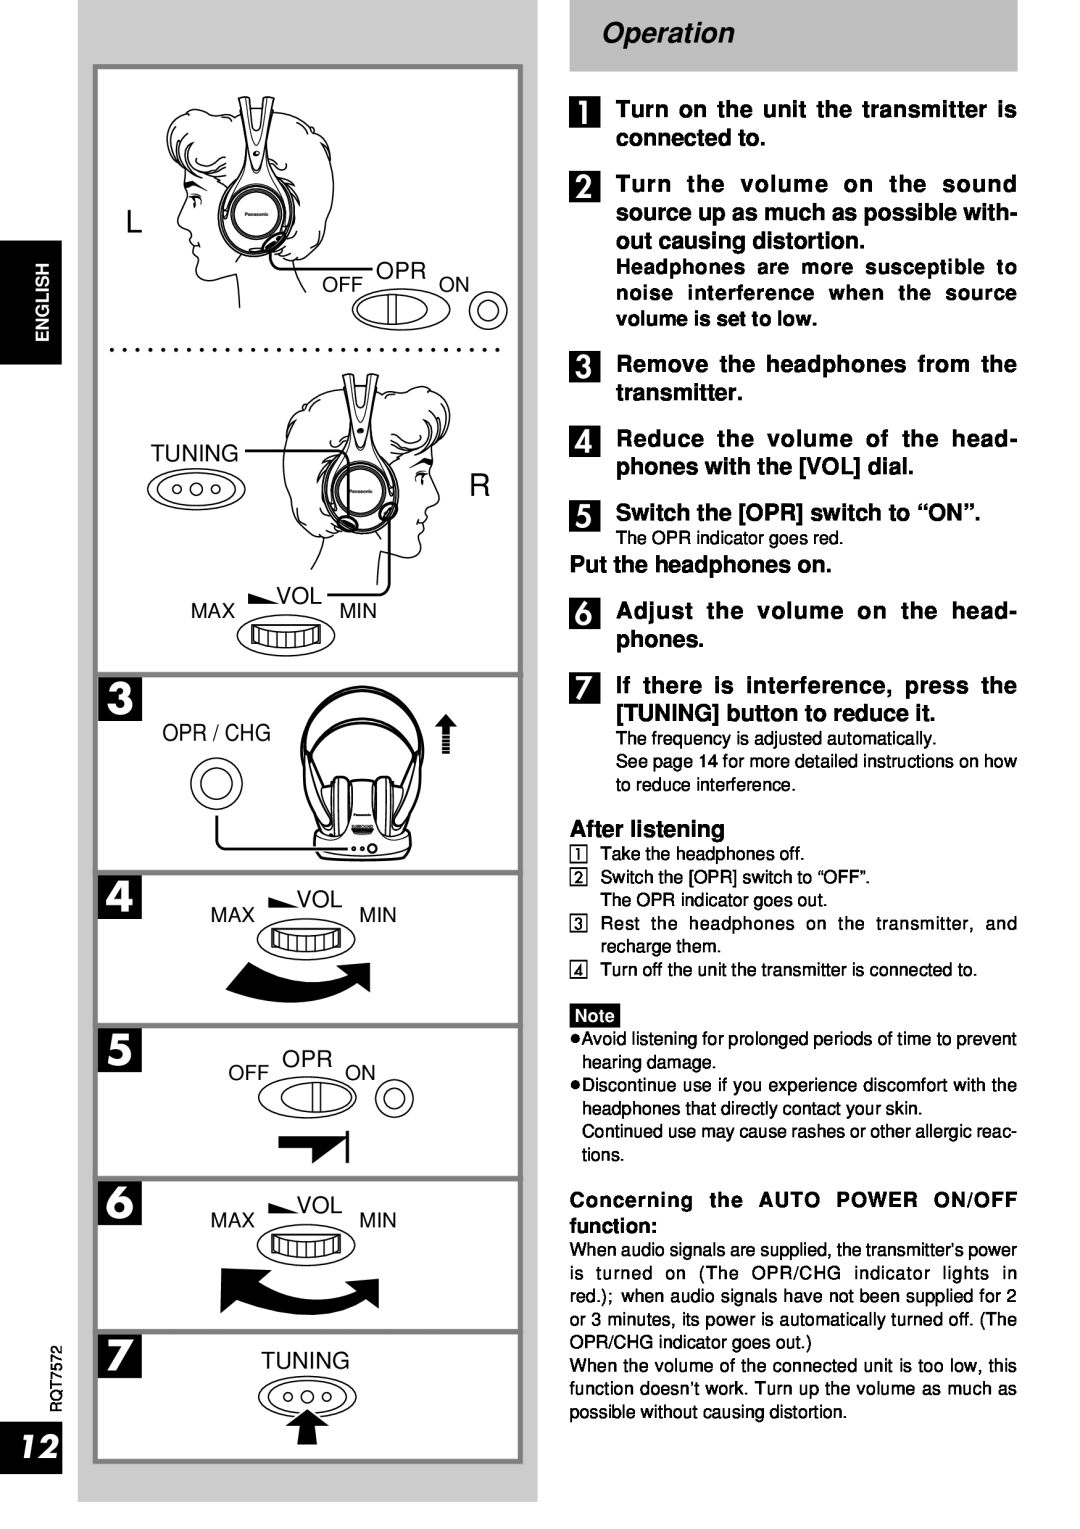 Panasonic RP-WF930 Operation, …Remove the headphones from the transmitter, …Switch the OPR switch to “ON”, After listening 